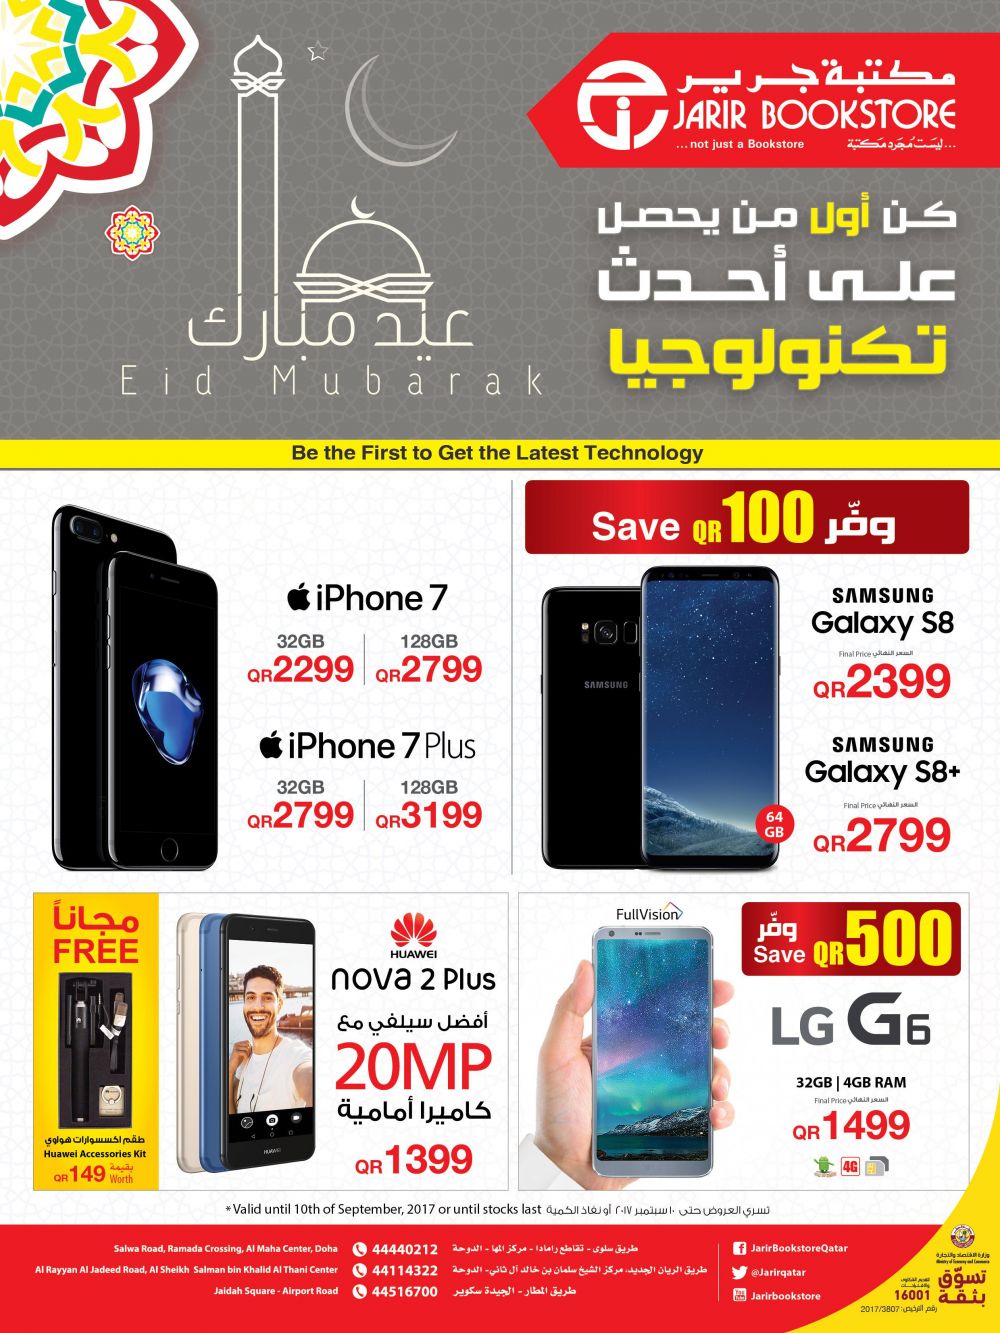 Amazing Prices on wide range of devices